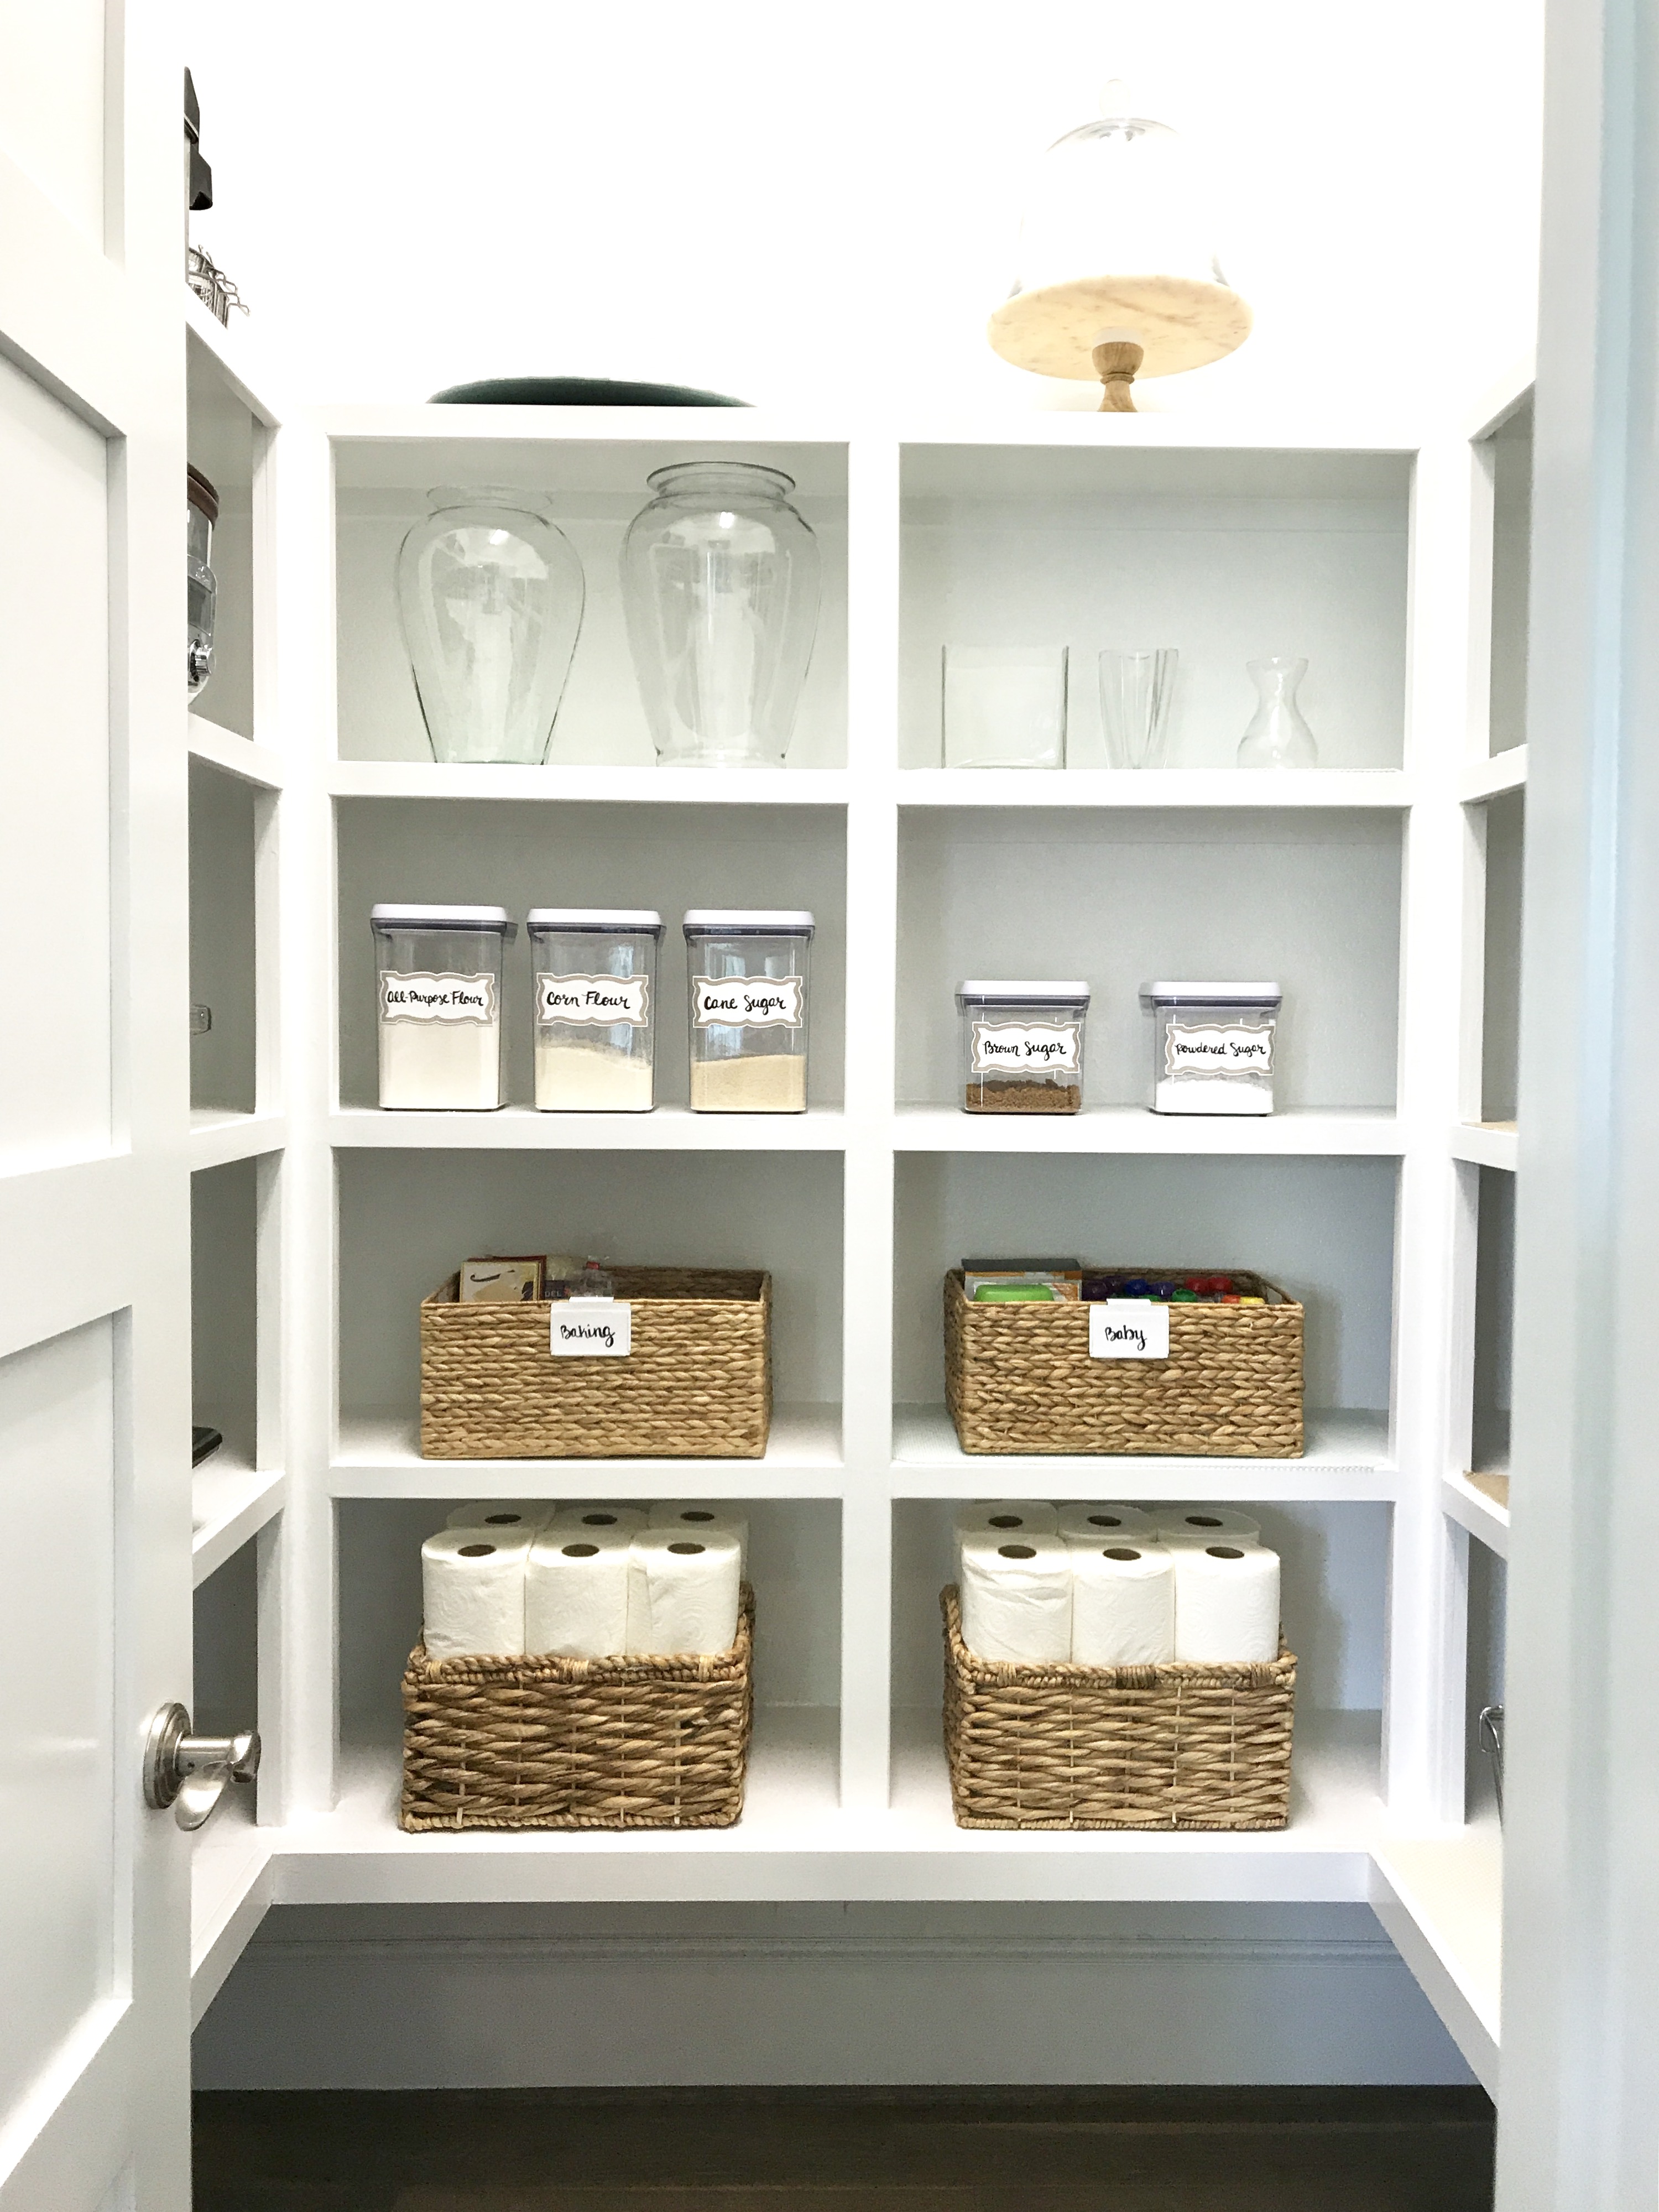 Best Pantry Organization Projects of 2017 - Organized Pantry by Organized Life Design